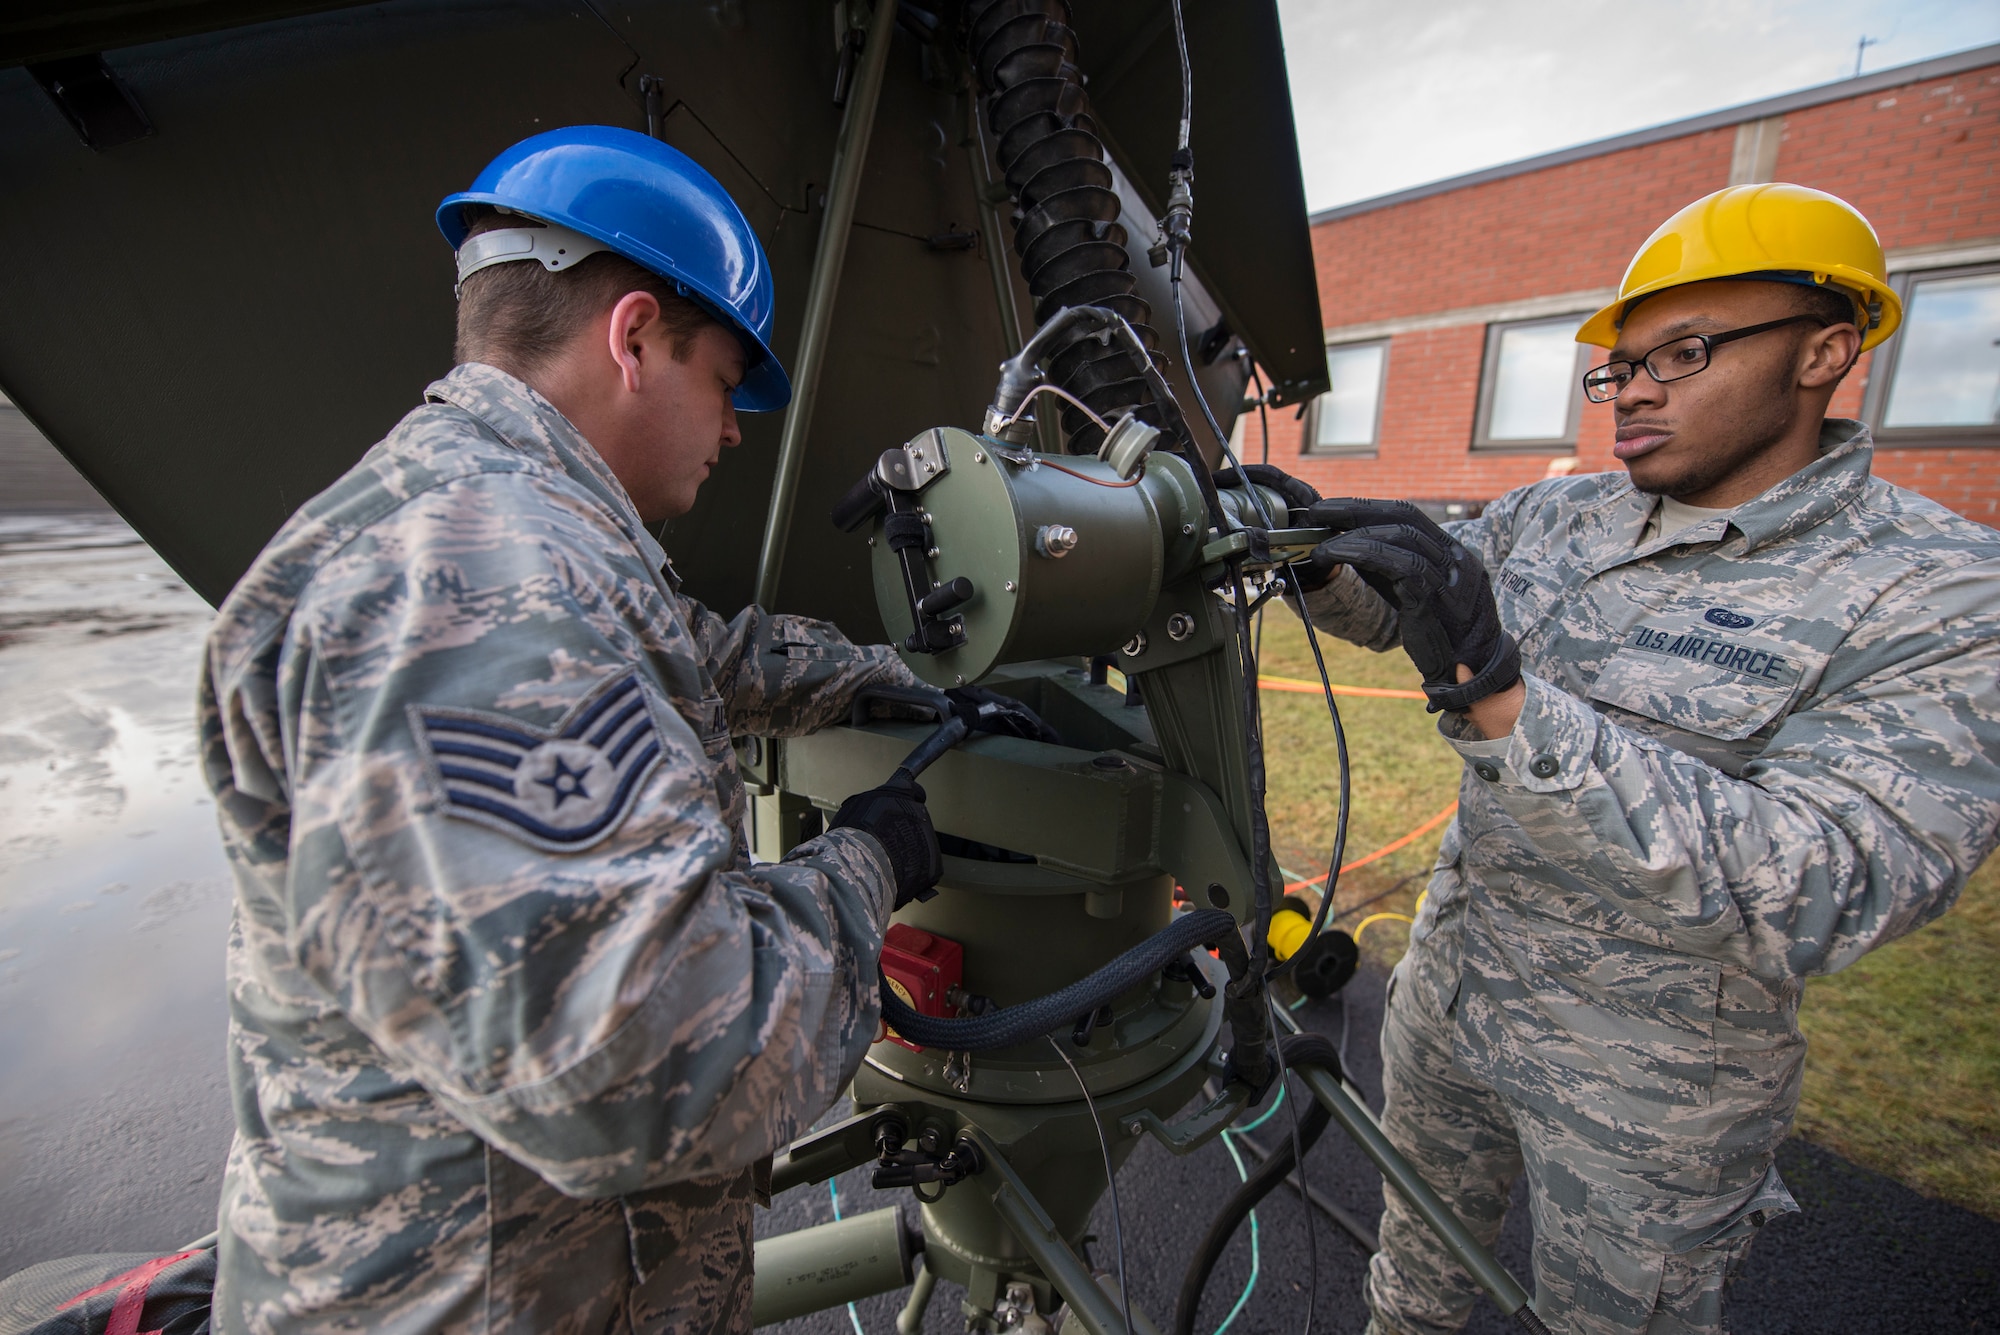 U.S. Air Force Staff Sgt. Charles Alexander, 269th Combat Communications Squadron radio frequency transmissions systems technician, left, and Airman 1st Class Donte Patrick, 1st CBCS radio frequency transmissions systems technician, inspect a satellite antenna for corrosion during Exercise Trident Juncture 18 at Rovaniemi, Finland, Nov. 1, 2018. The exercise increases security by deterring possible threats and enhancing interoperability among NATO allies and partners. (U.S. Air Force photo by Senior Airman Luke Milano)